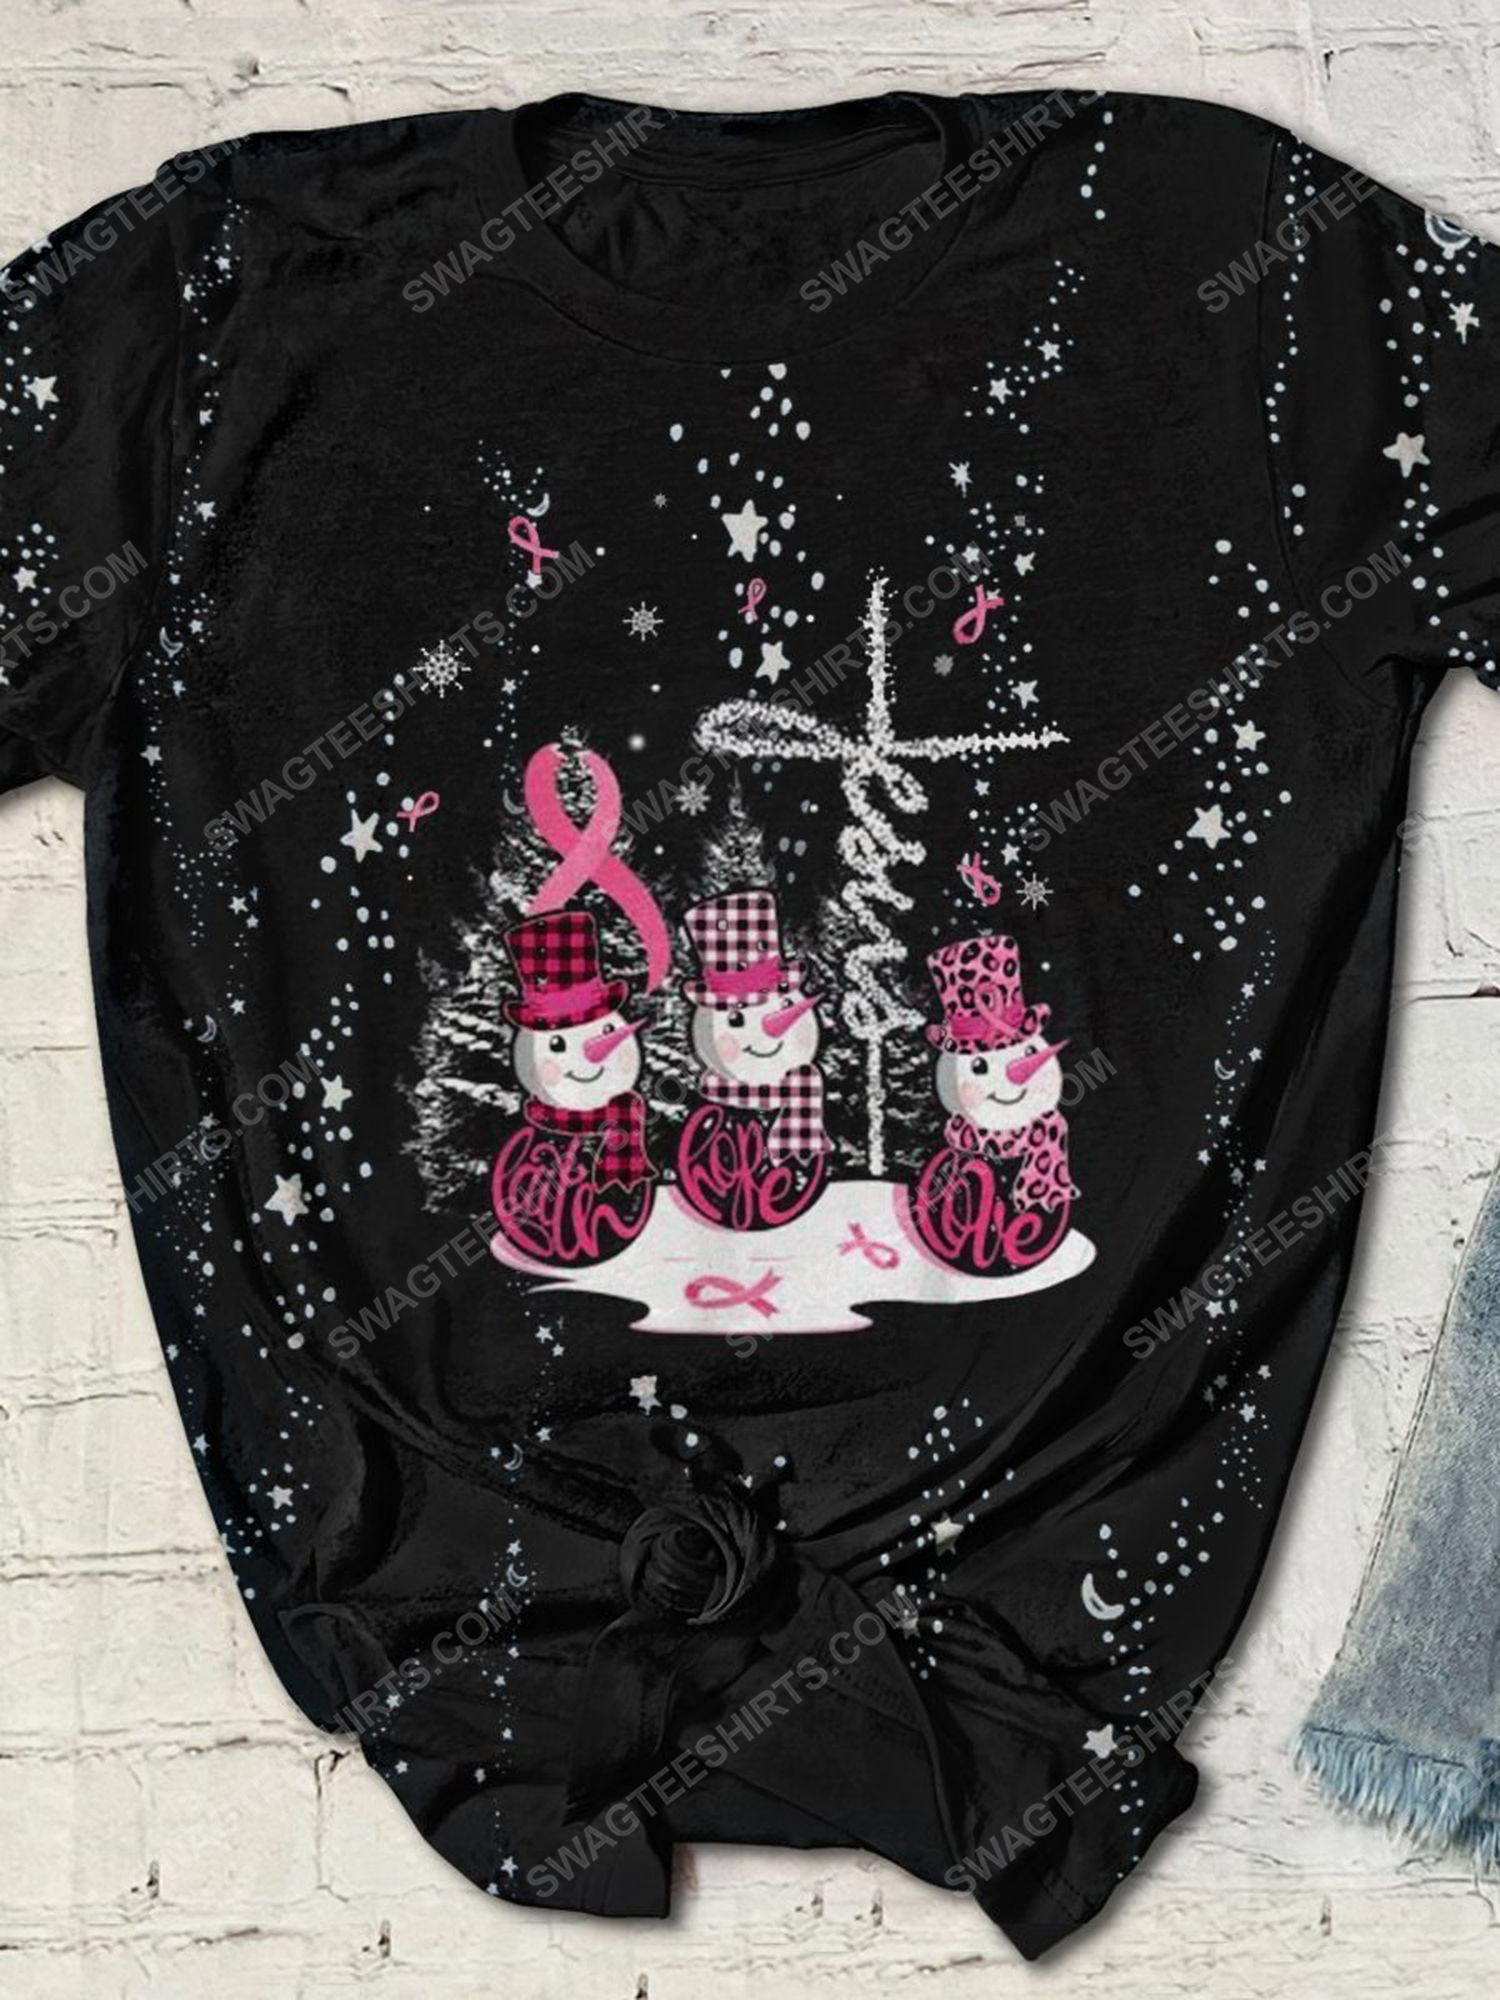 [special edition] Christmas Jesus ​breast cancer awareness full print shirt – maria (cancer)